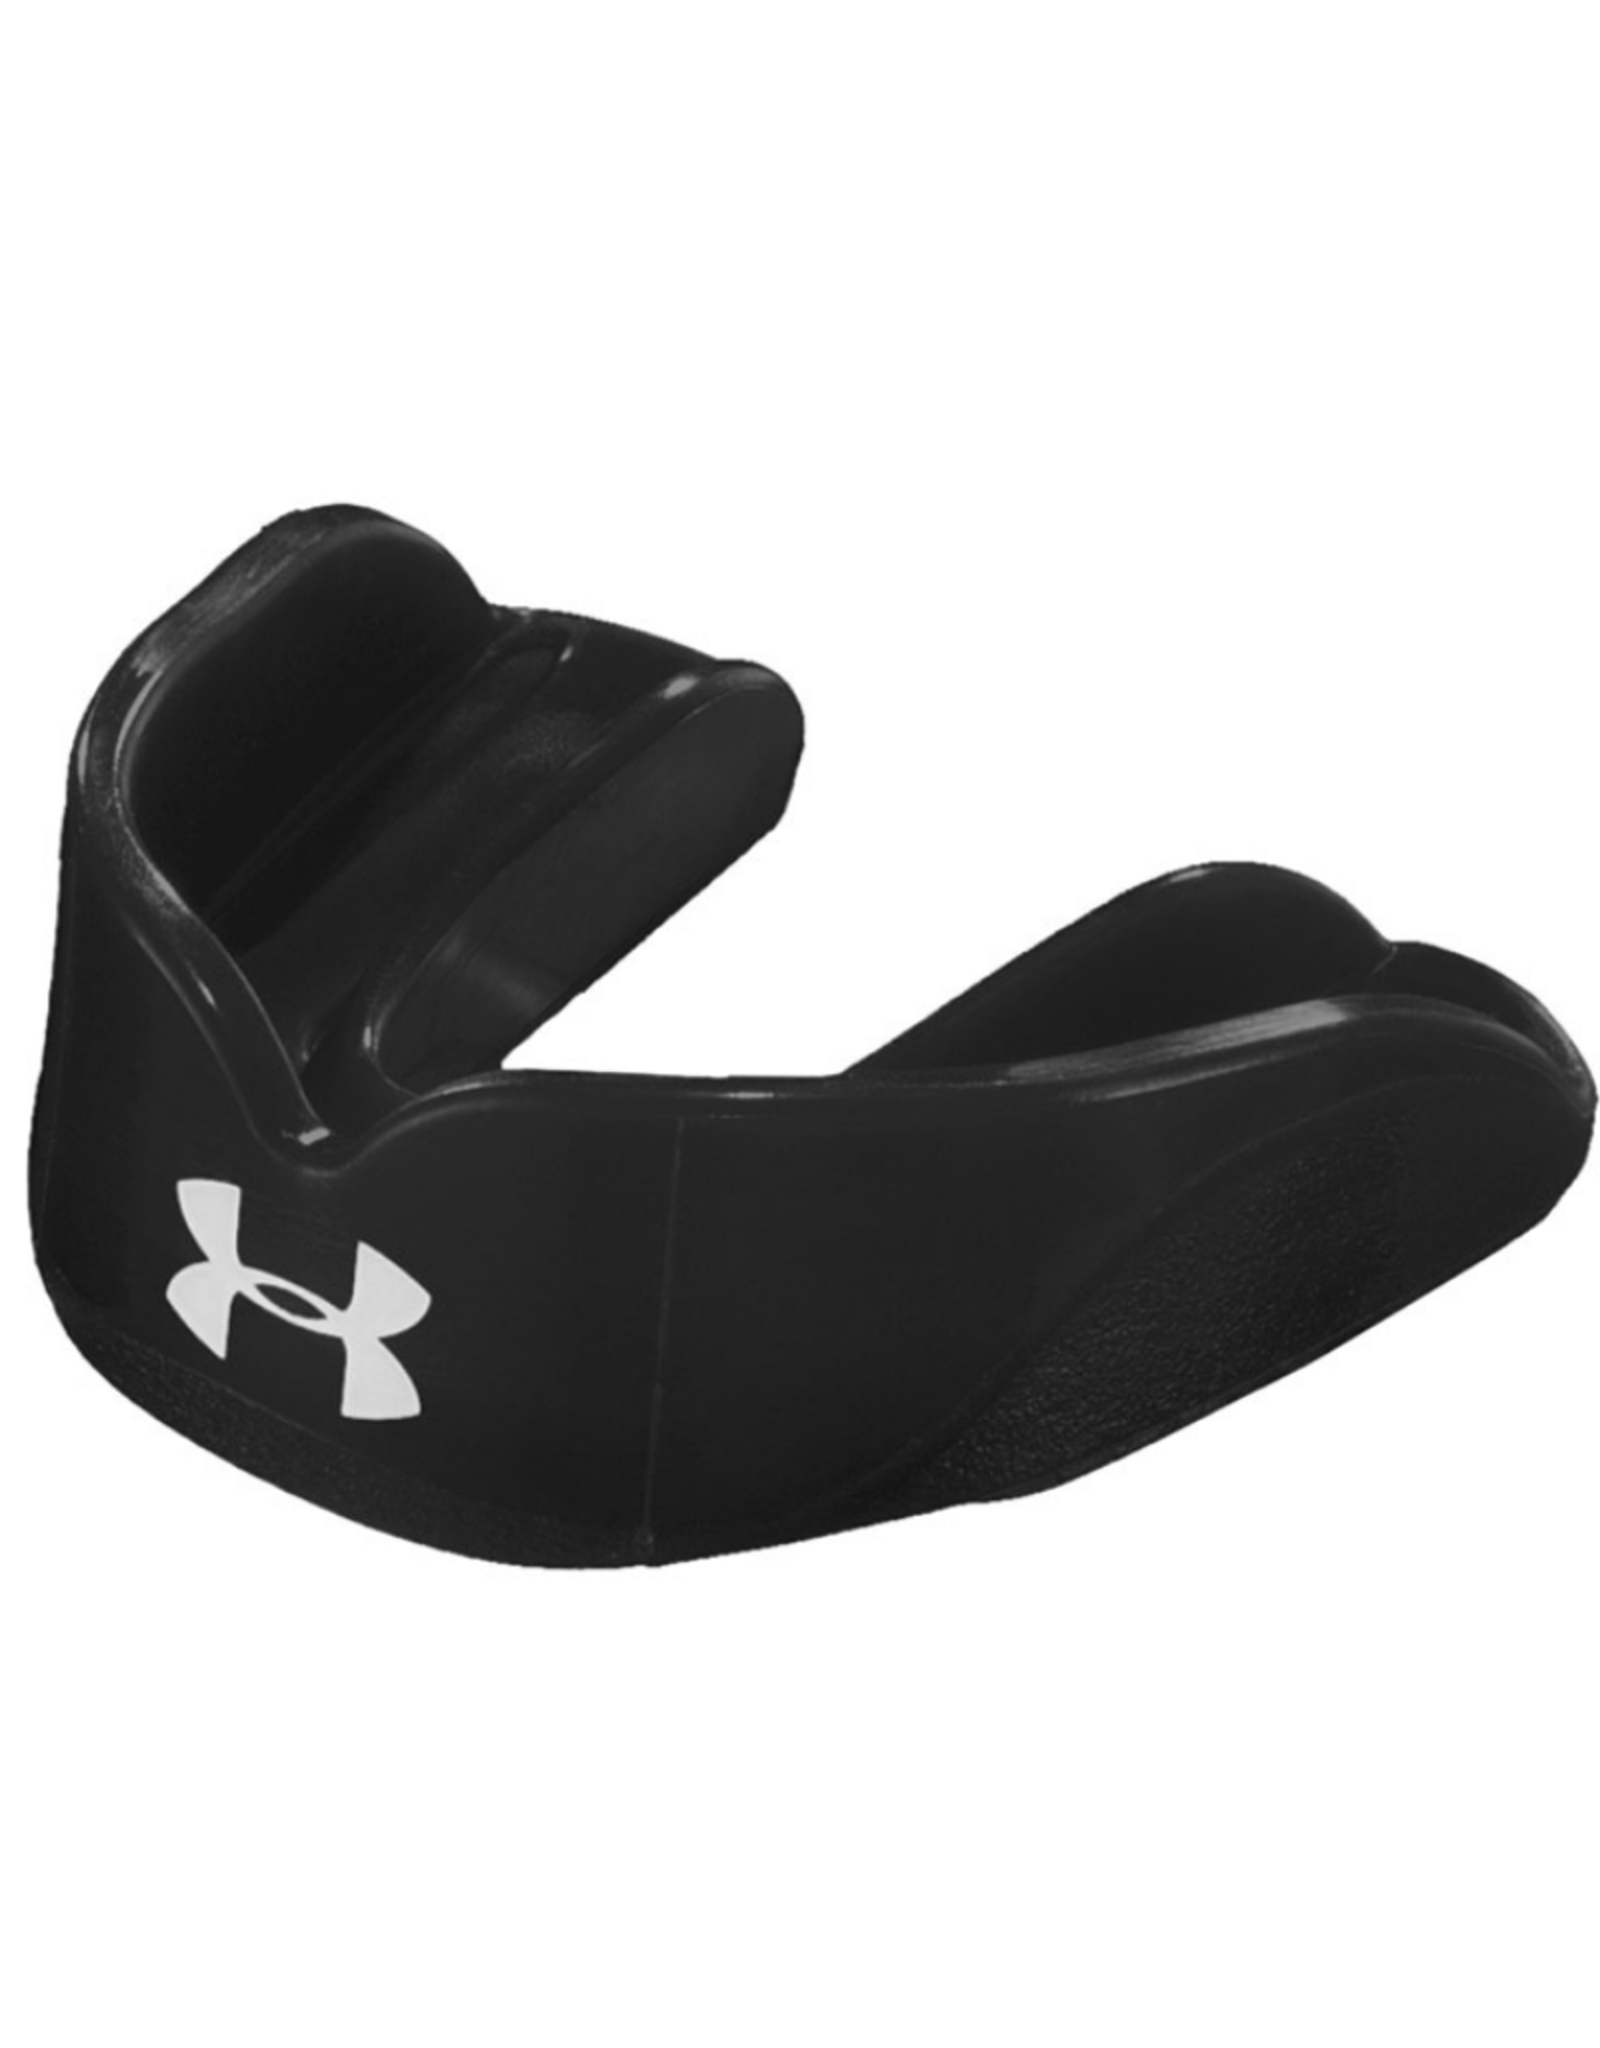 Under Armour Youth Armourfit Mouthguard Black